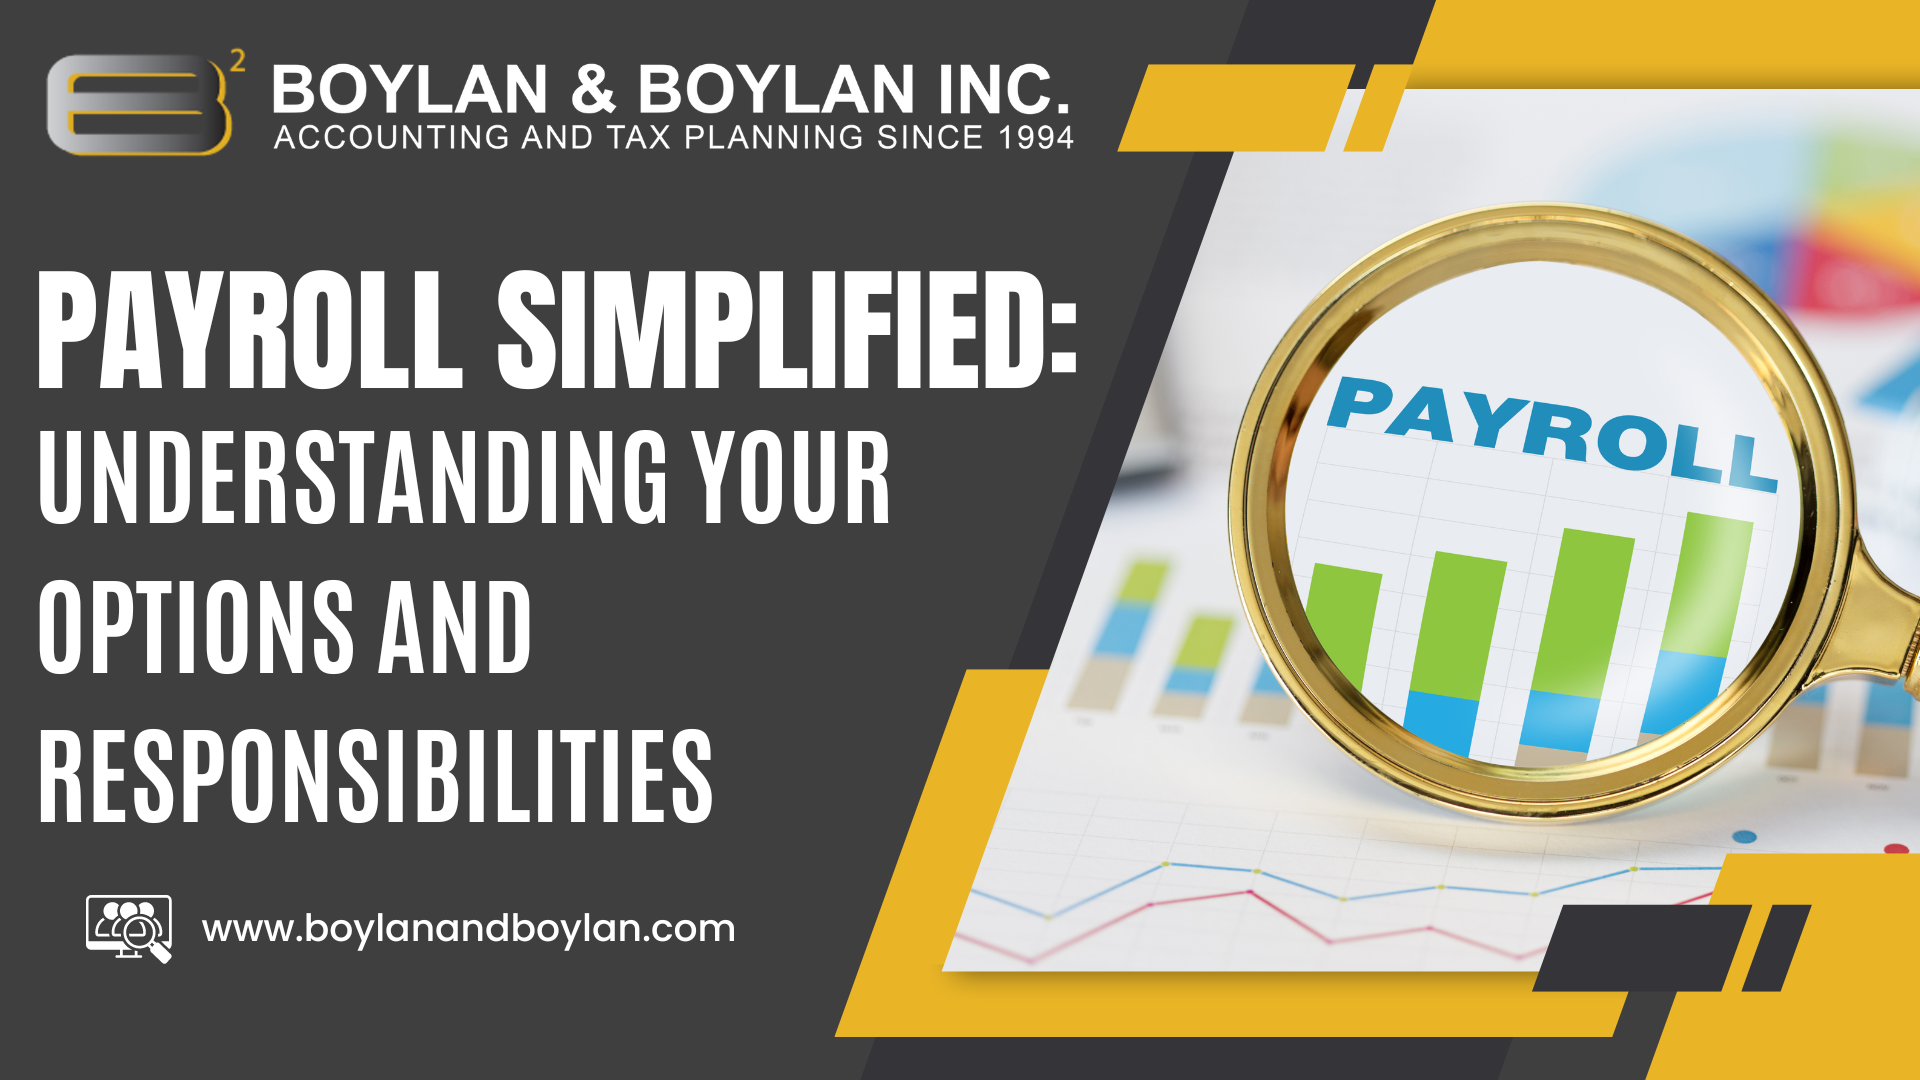 Payroll Simplified: Understanding Your Options and Responsibilities